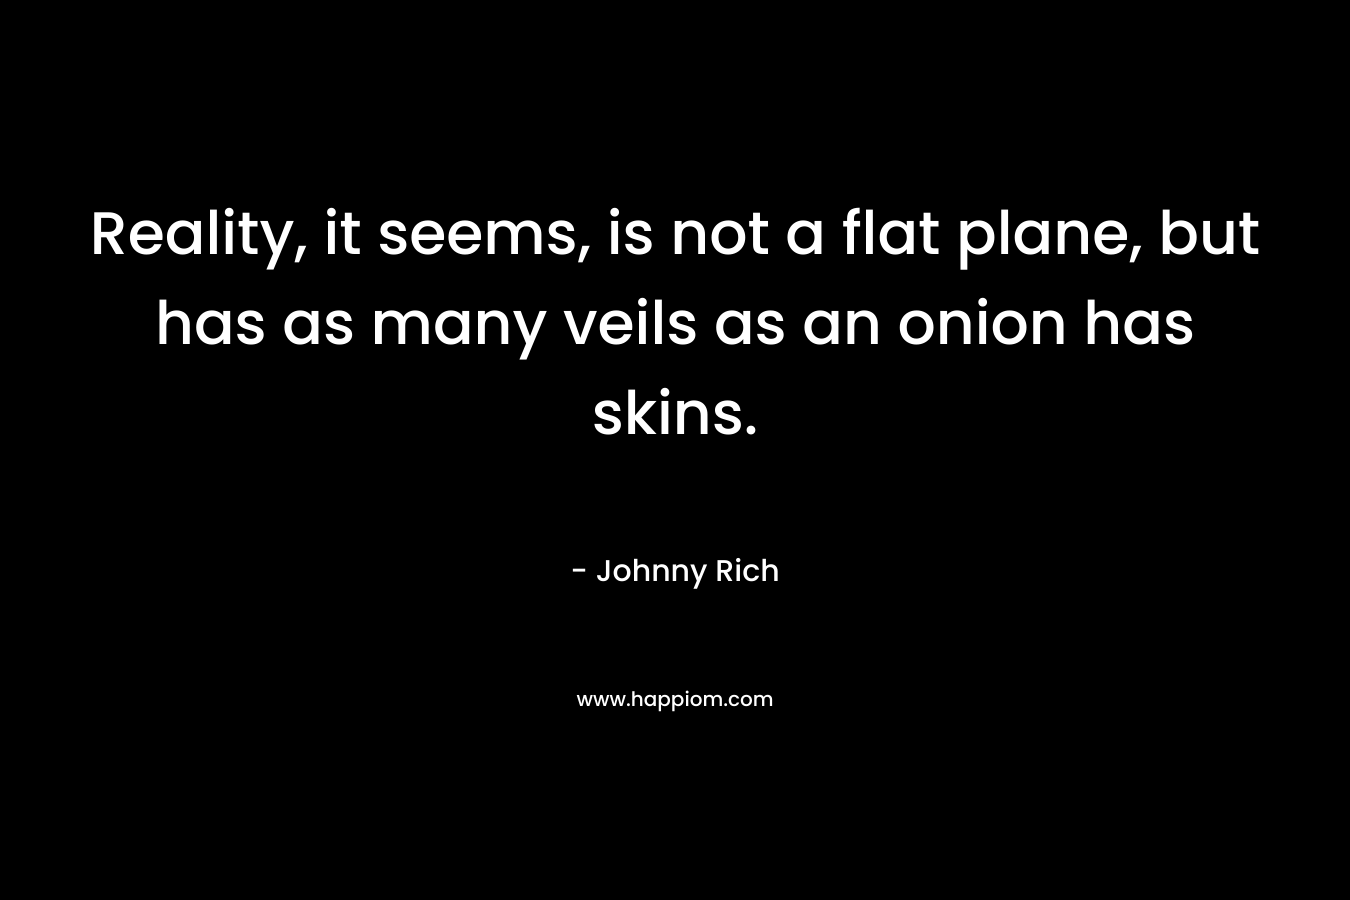 Reality, it seems, is not a flat plane, but has as many veils as an onion has skins. – Johnny Rich